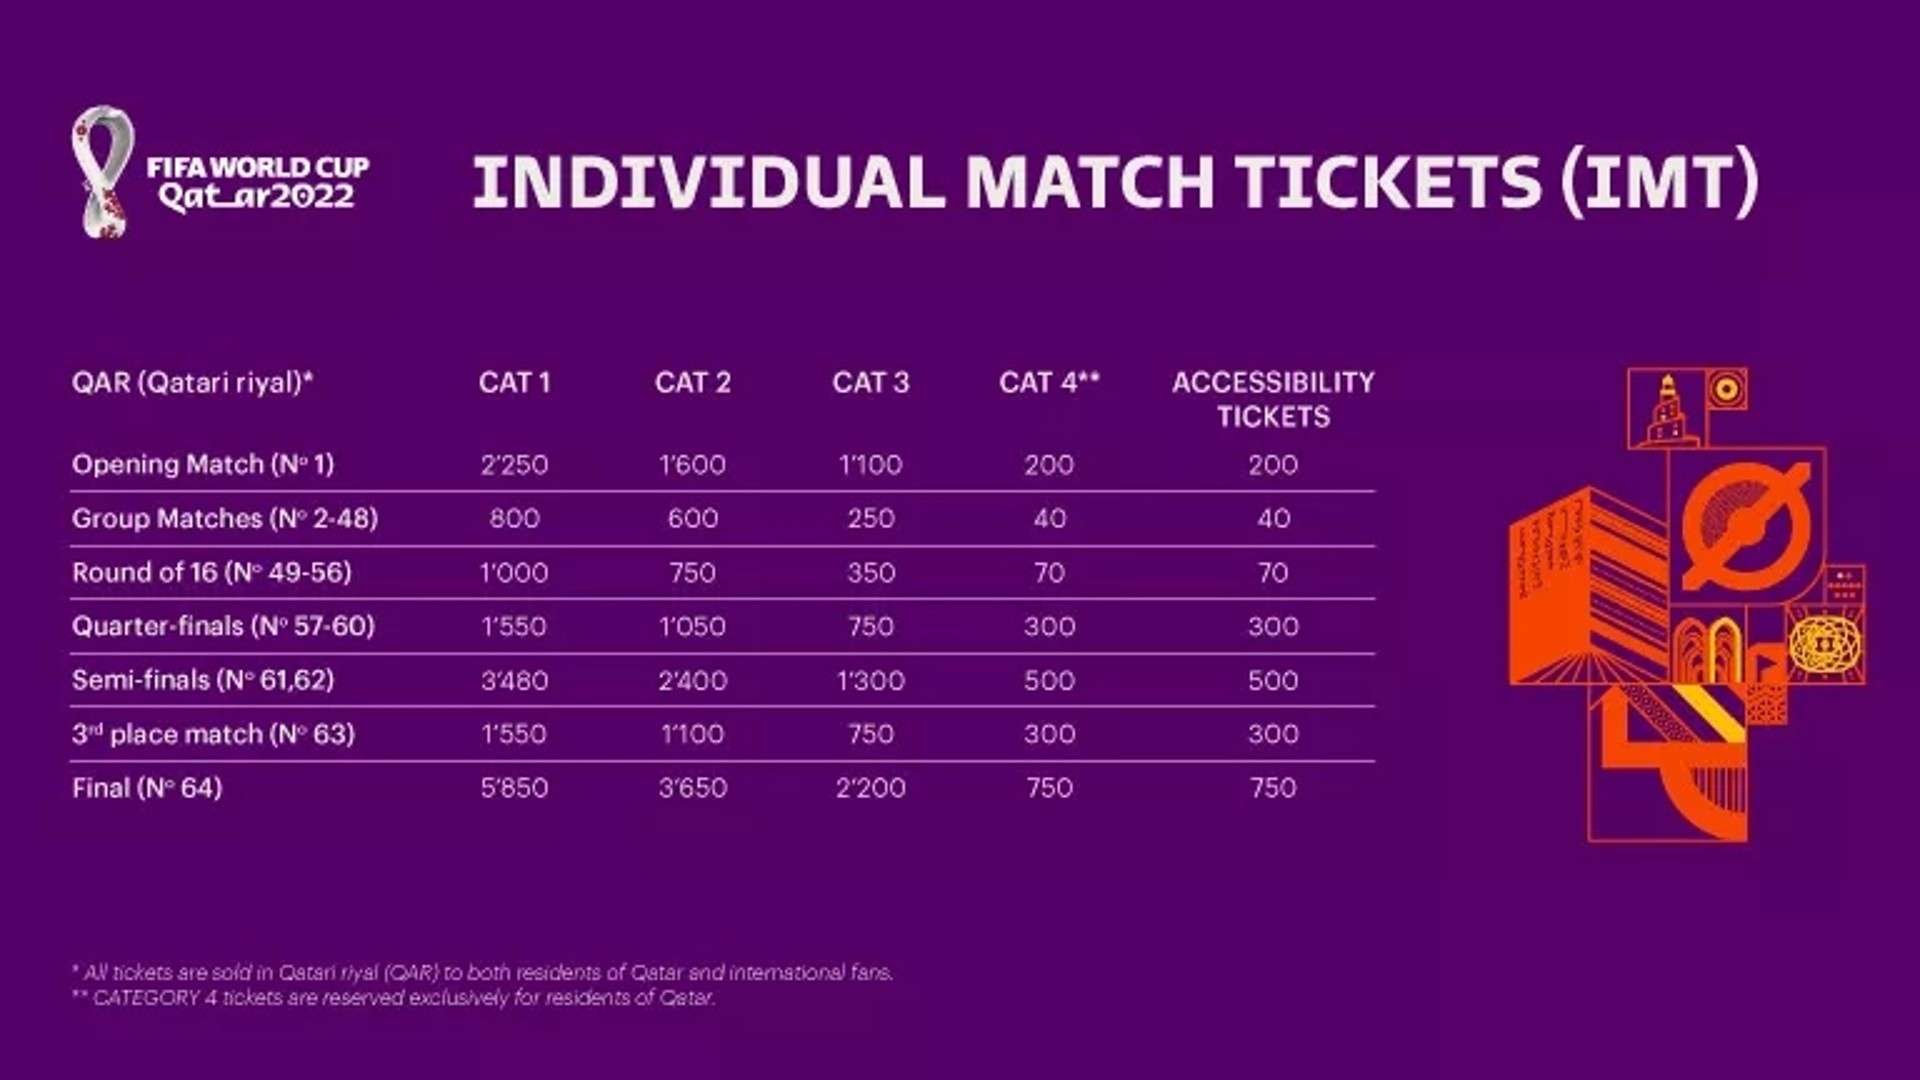 EMBED ONLY World Cup 2022 ticket prices